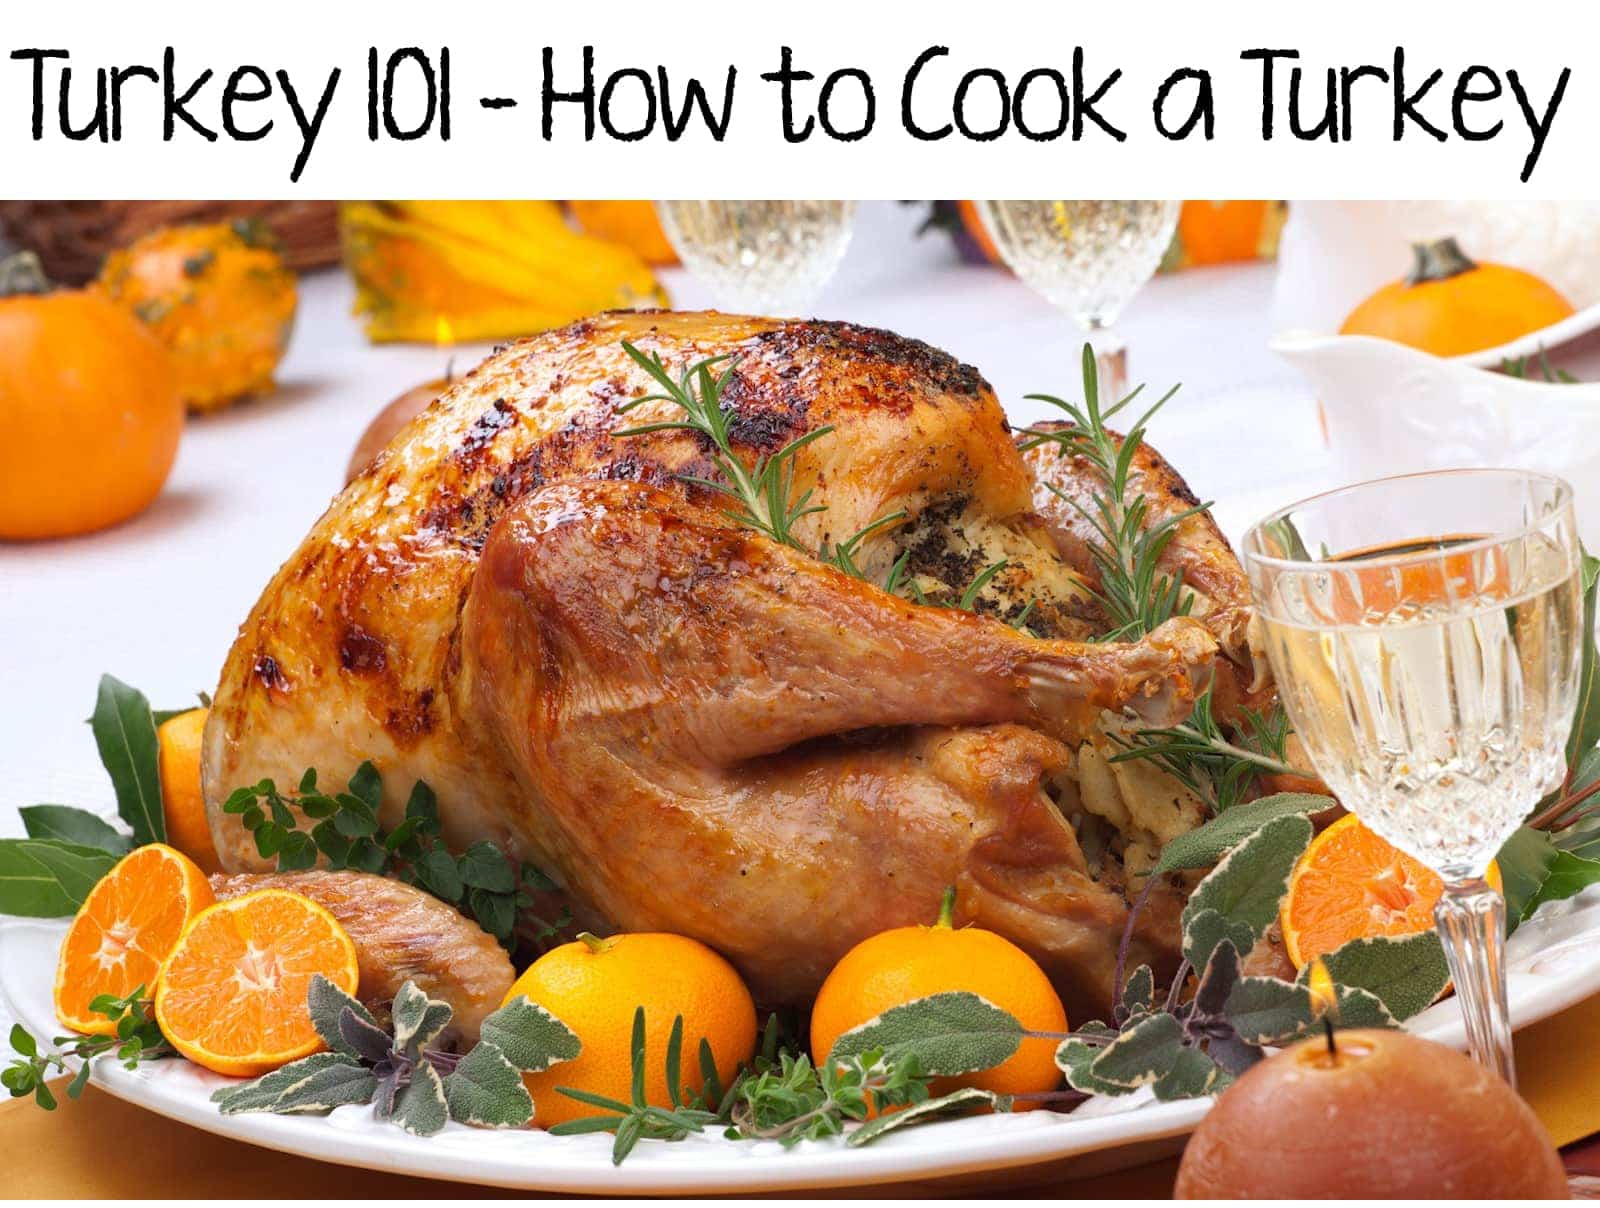 How to properly oven roast a turkey